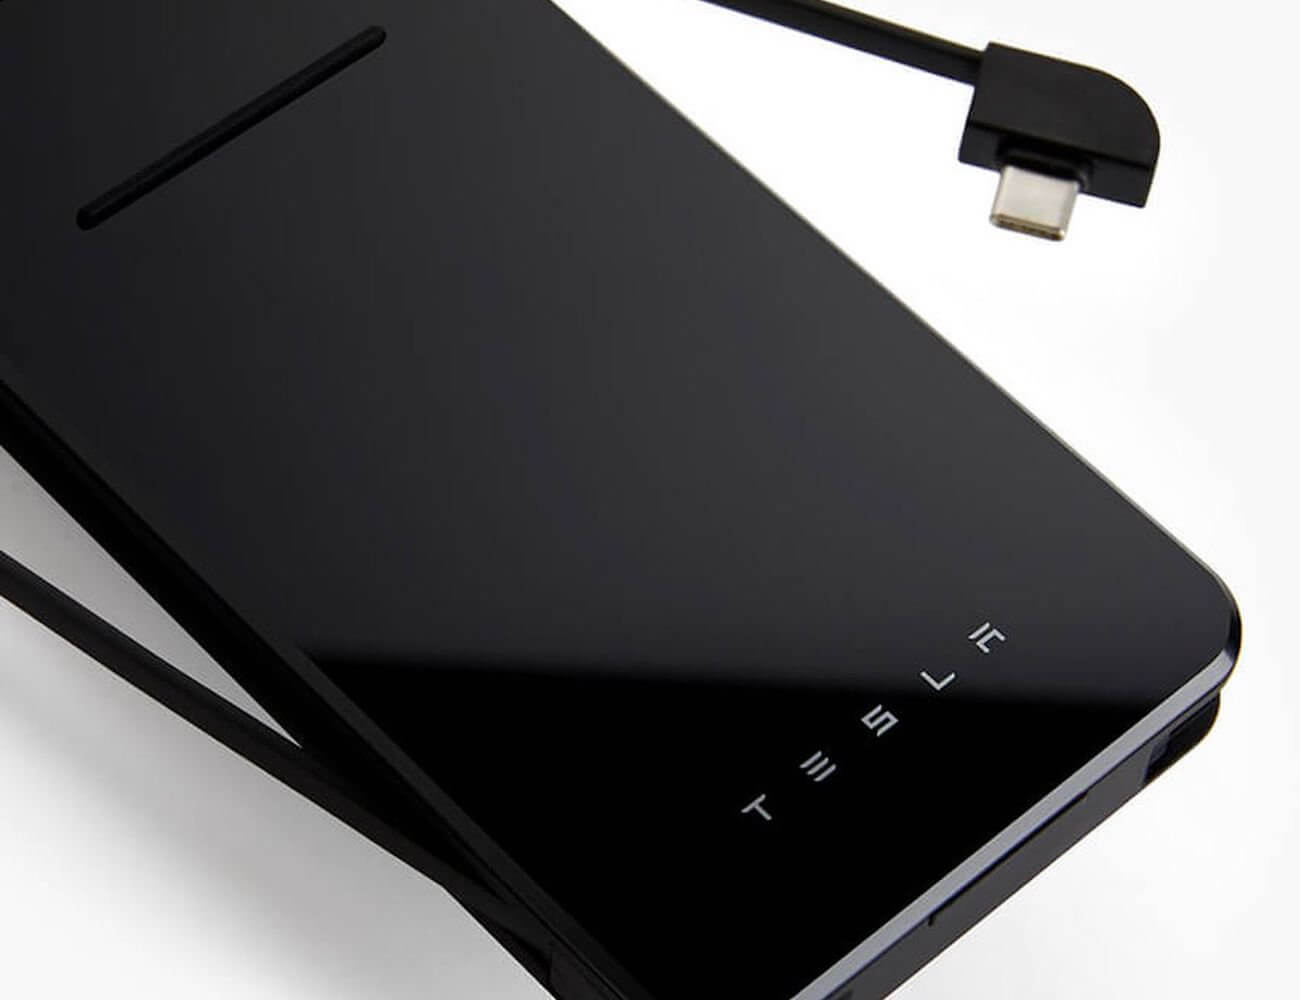 Tesla is restocking and lowering the price of its wireless charging battery bank